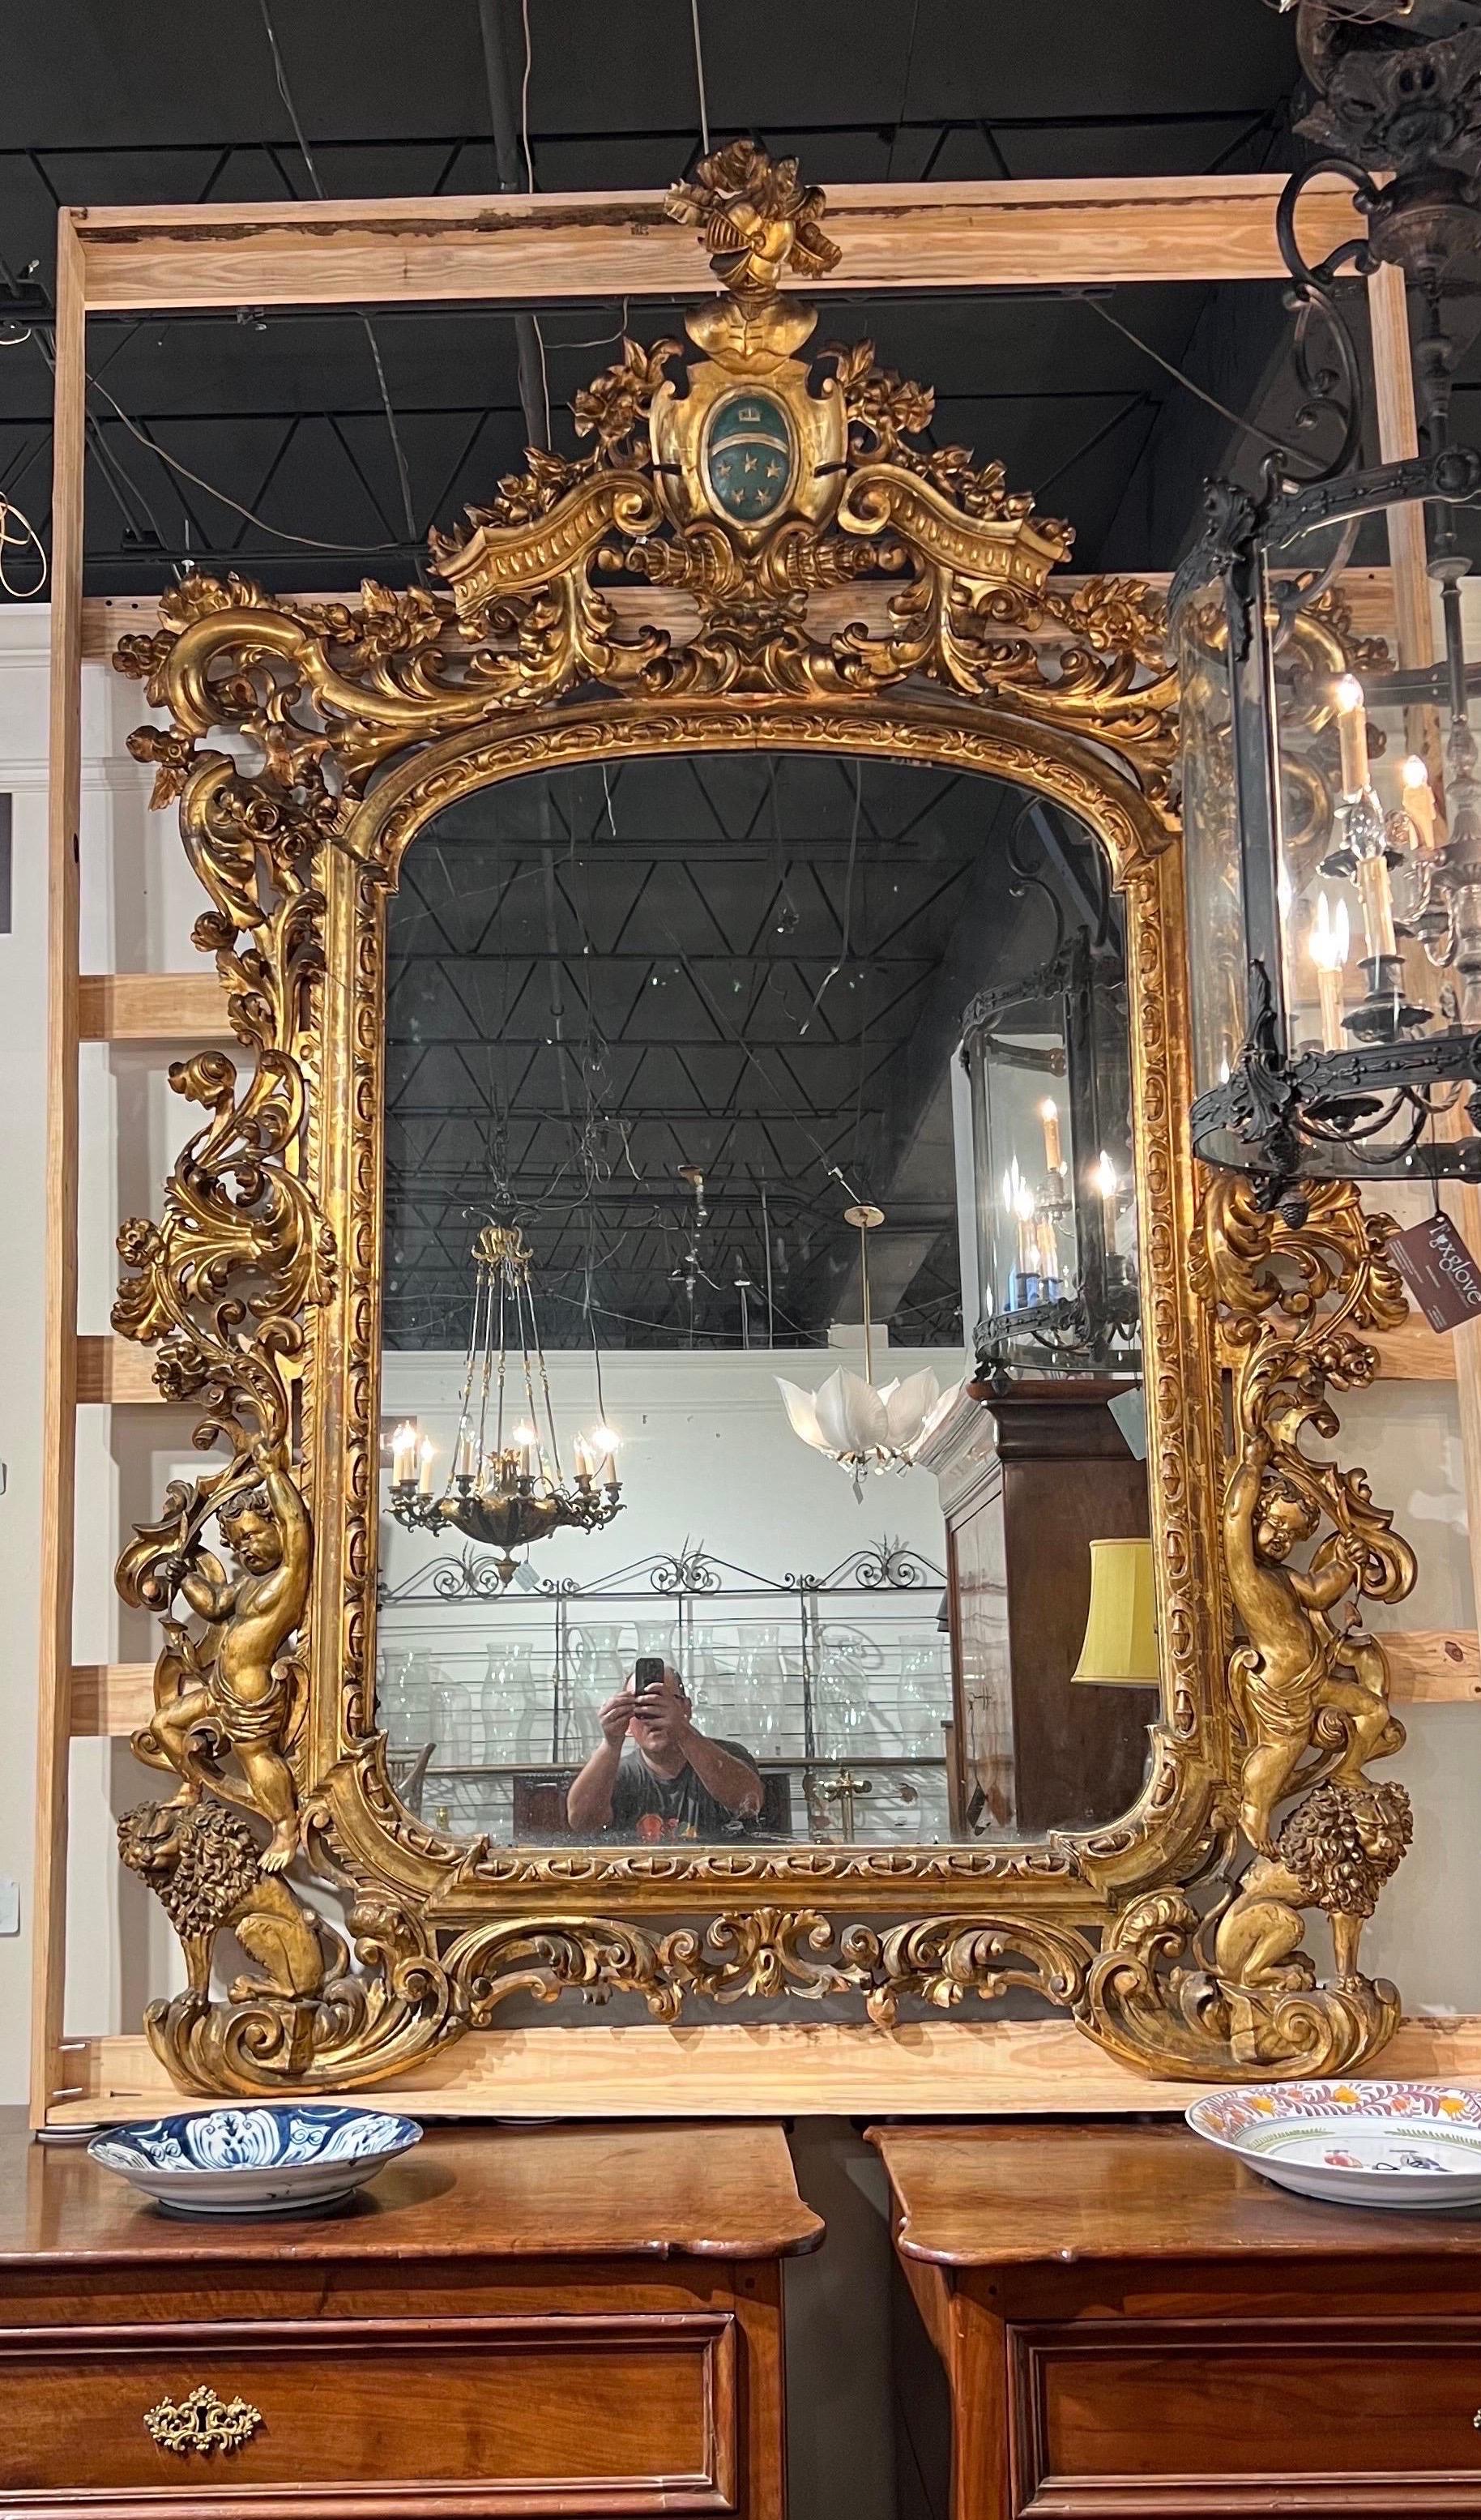 Monumental and impressively over the top 18th-19th century Giltwood mirror, likely Italian. Standing 8’ tall by over 5’ wide, this mirror features heavily carved Giltwood foliage, cherubs, lions and a coat of arms at the crest. Very impressive in